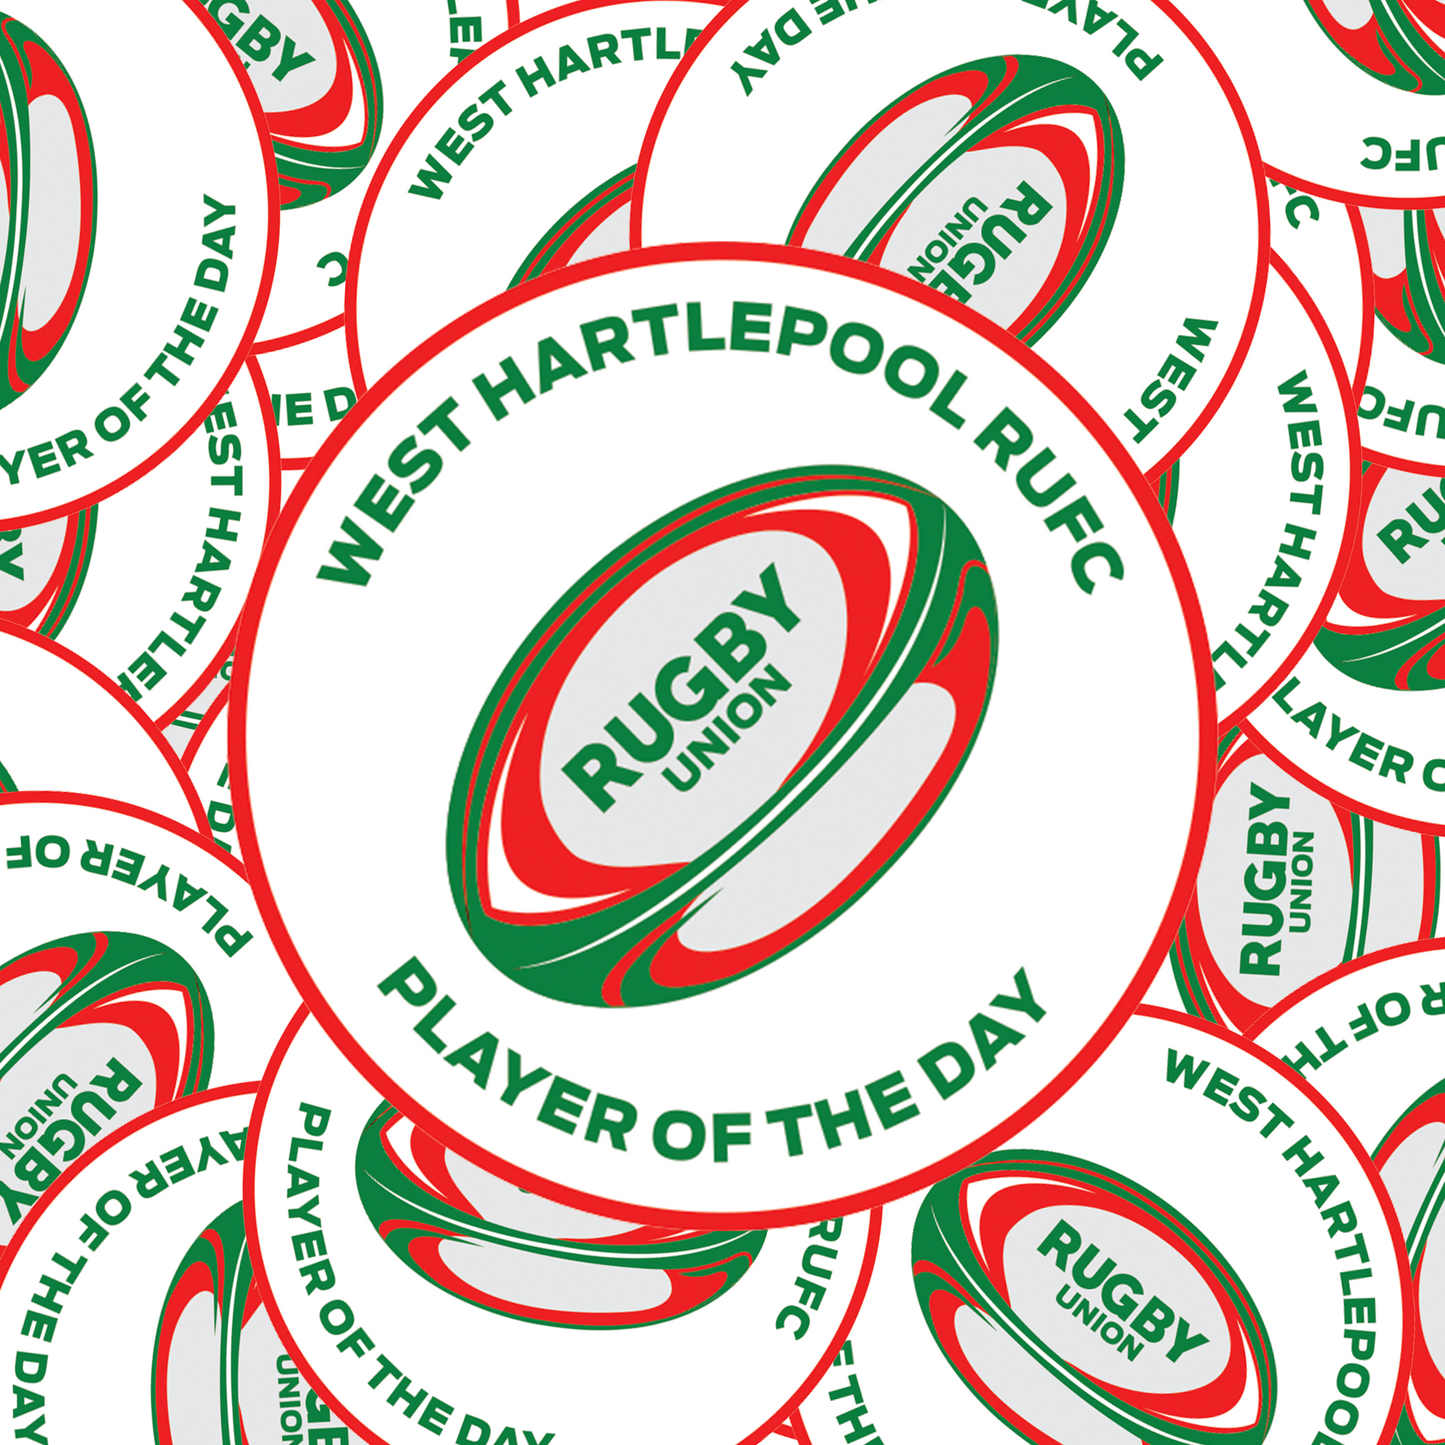 Personalised Rugby Union stickers - 5 Colour Options